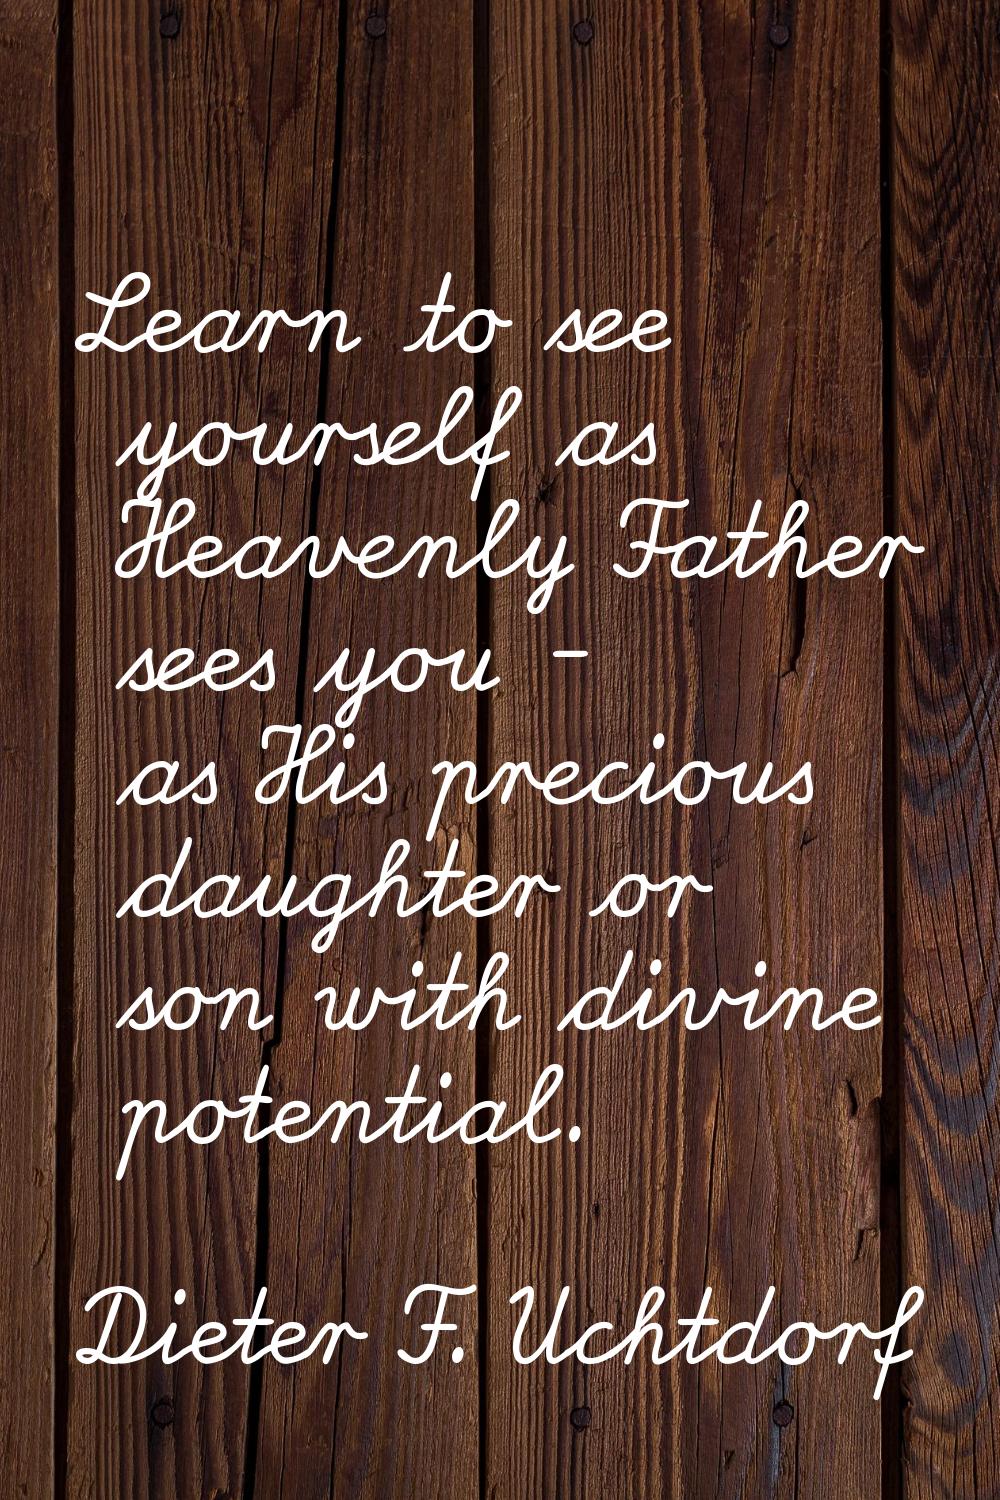 Learn to see yourself as Heavenly Father sees you - as His precious daughter or son with divine pot